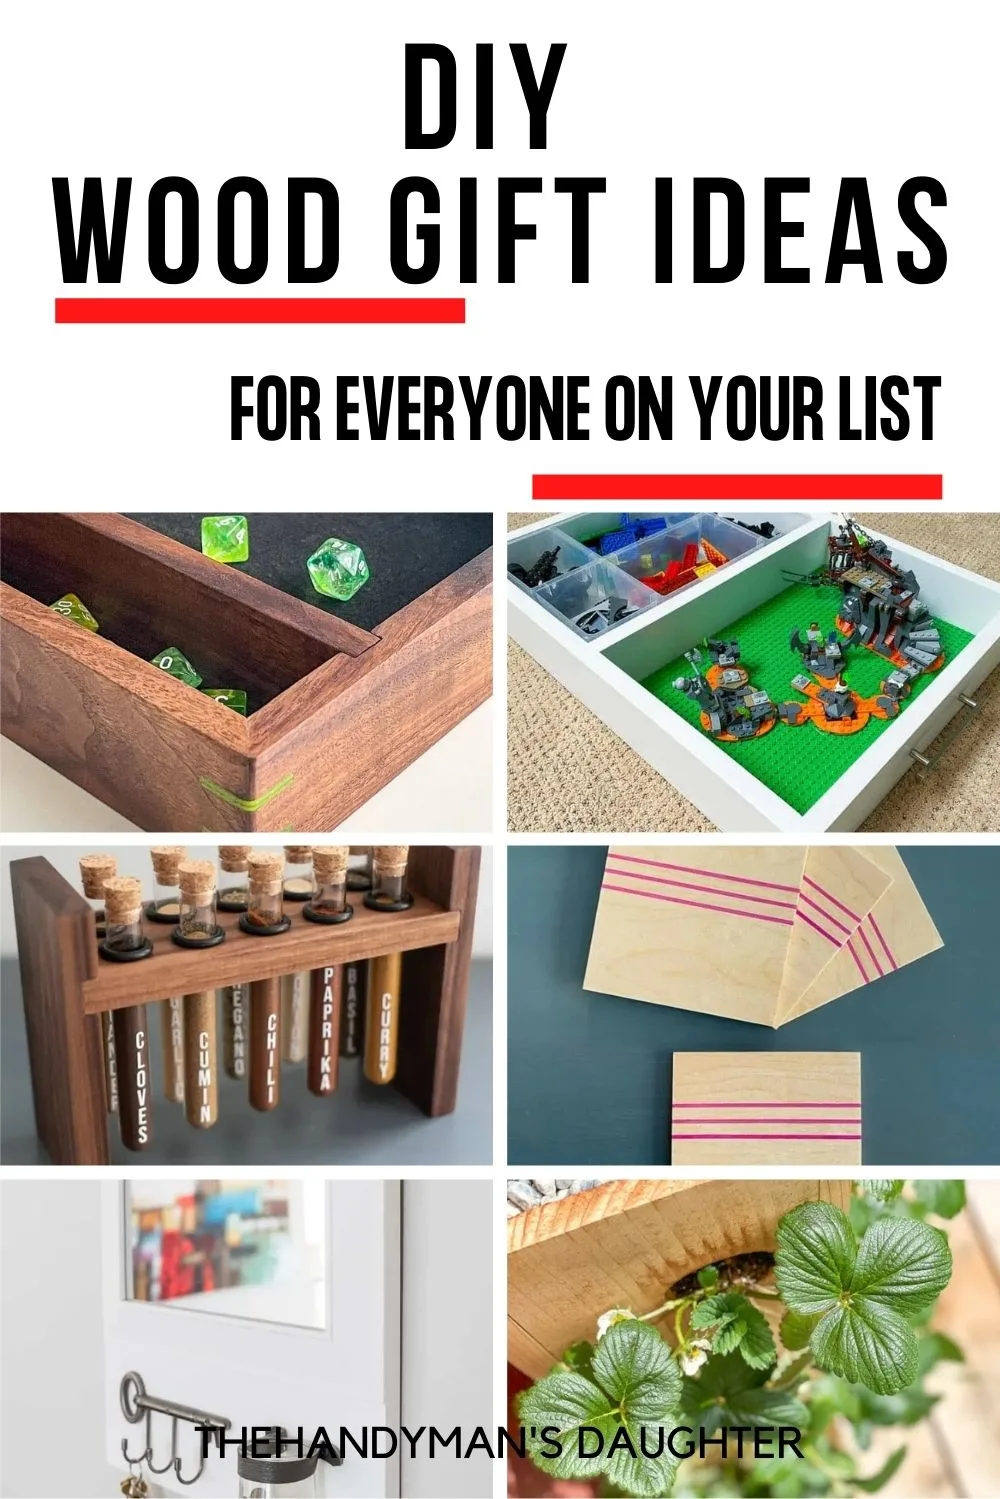 Personalized Kitchen Gifts and Ideas for Everyone on your List